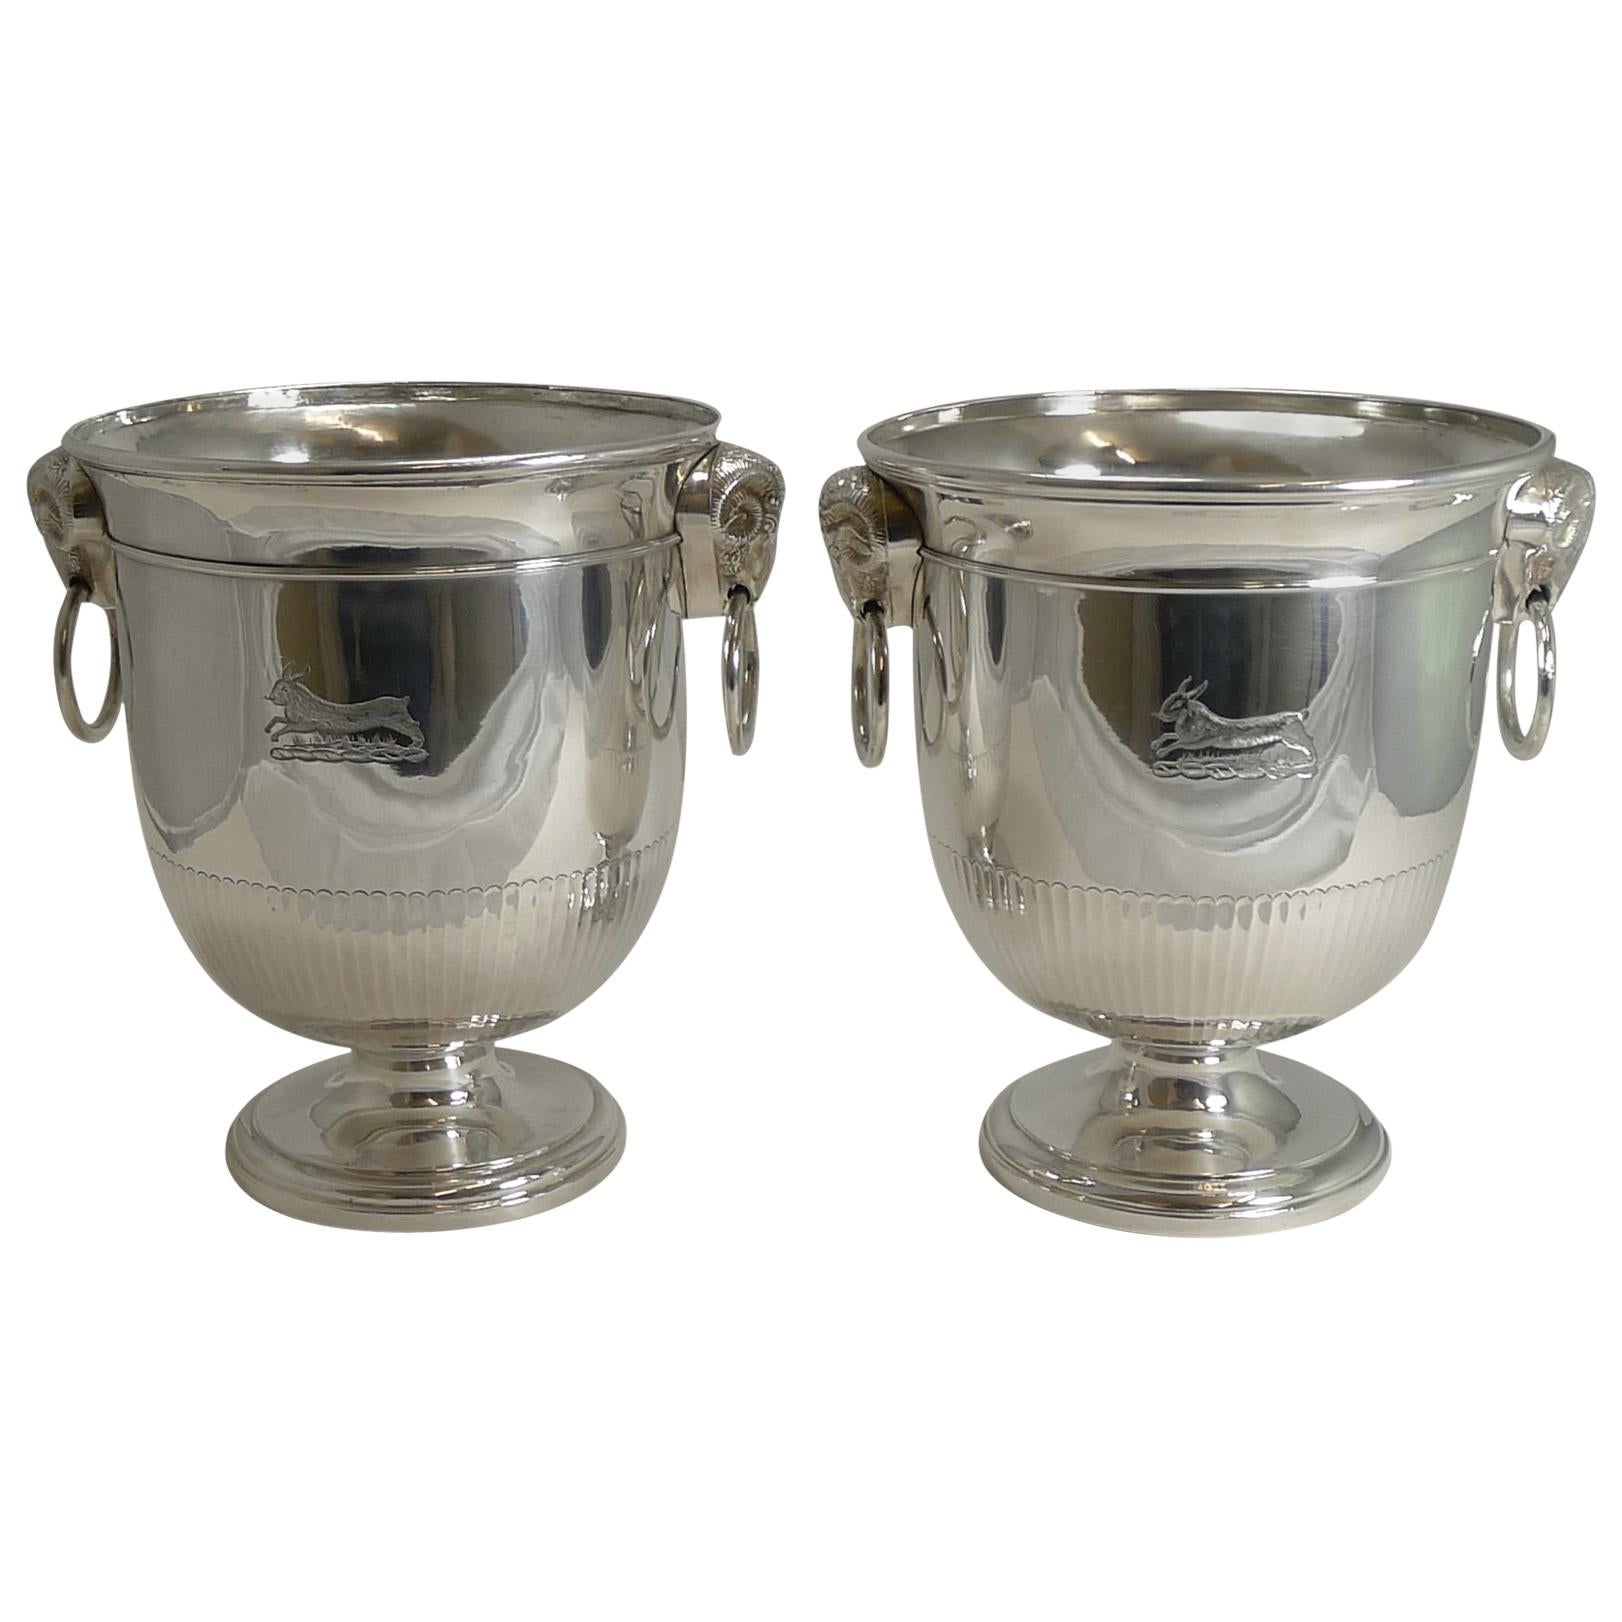 Fine Pair of English Sheffield Plate Wine / Champagne Coolers / Ice Buckets